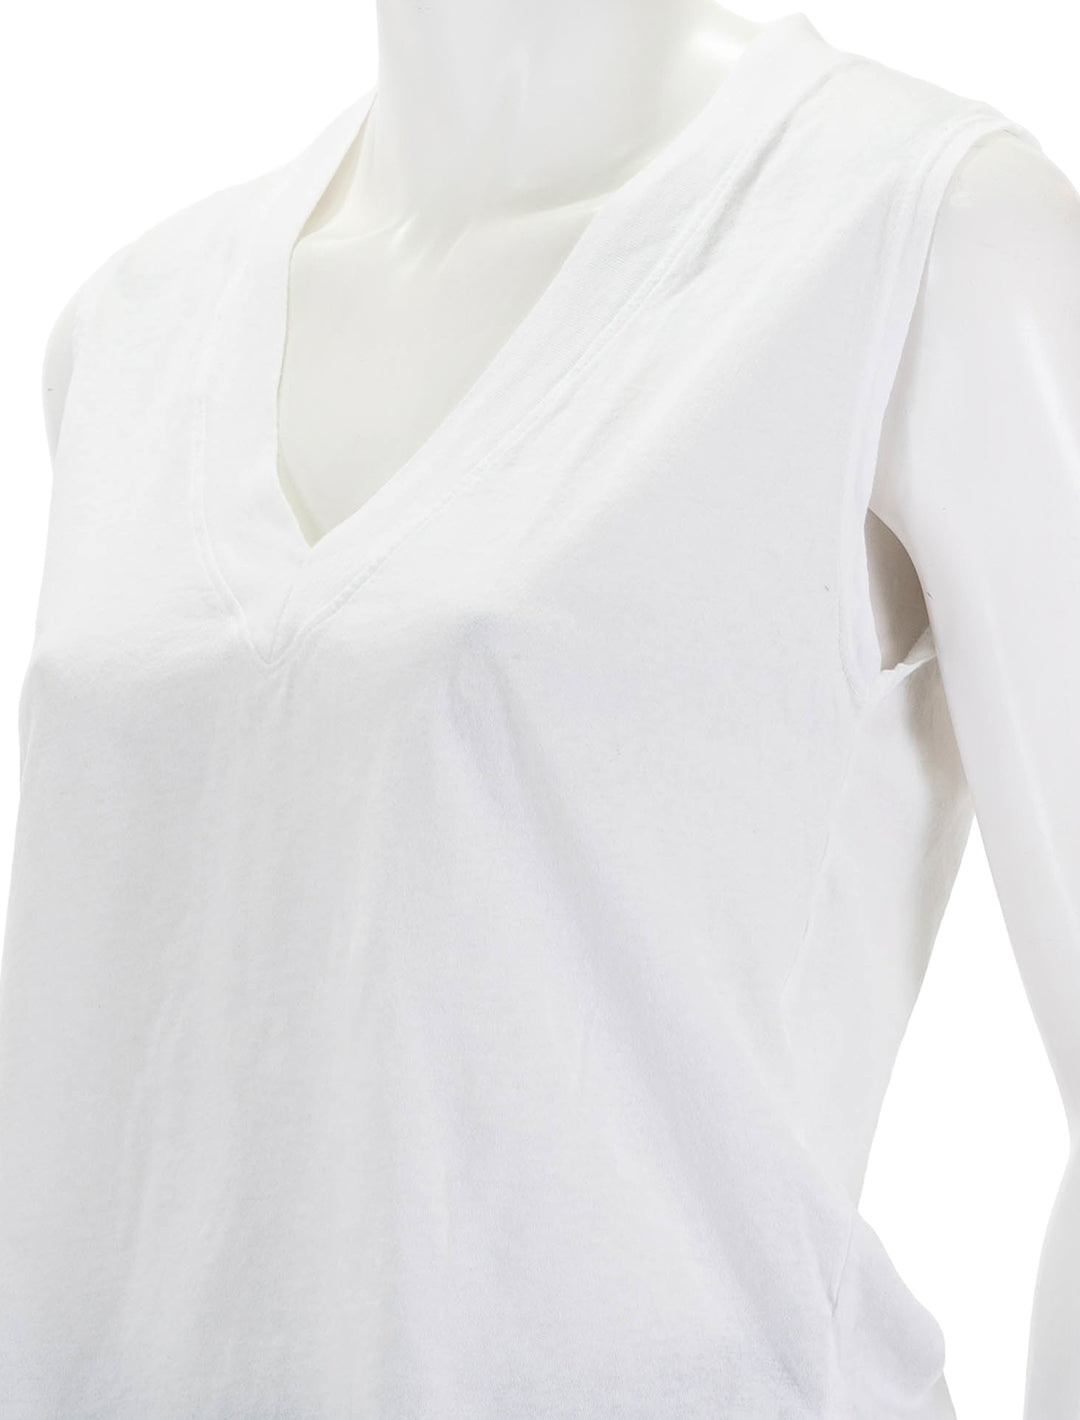 Close-up view of Perfectwhitetee's margot tee in white.